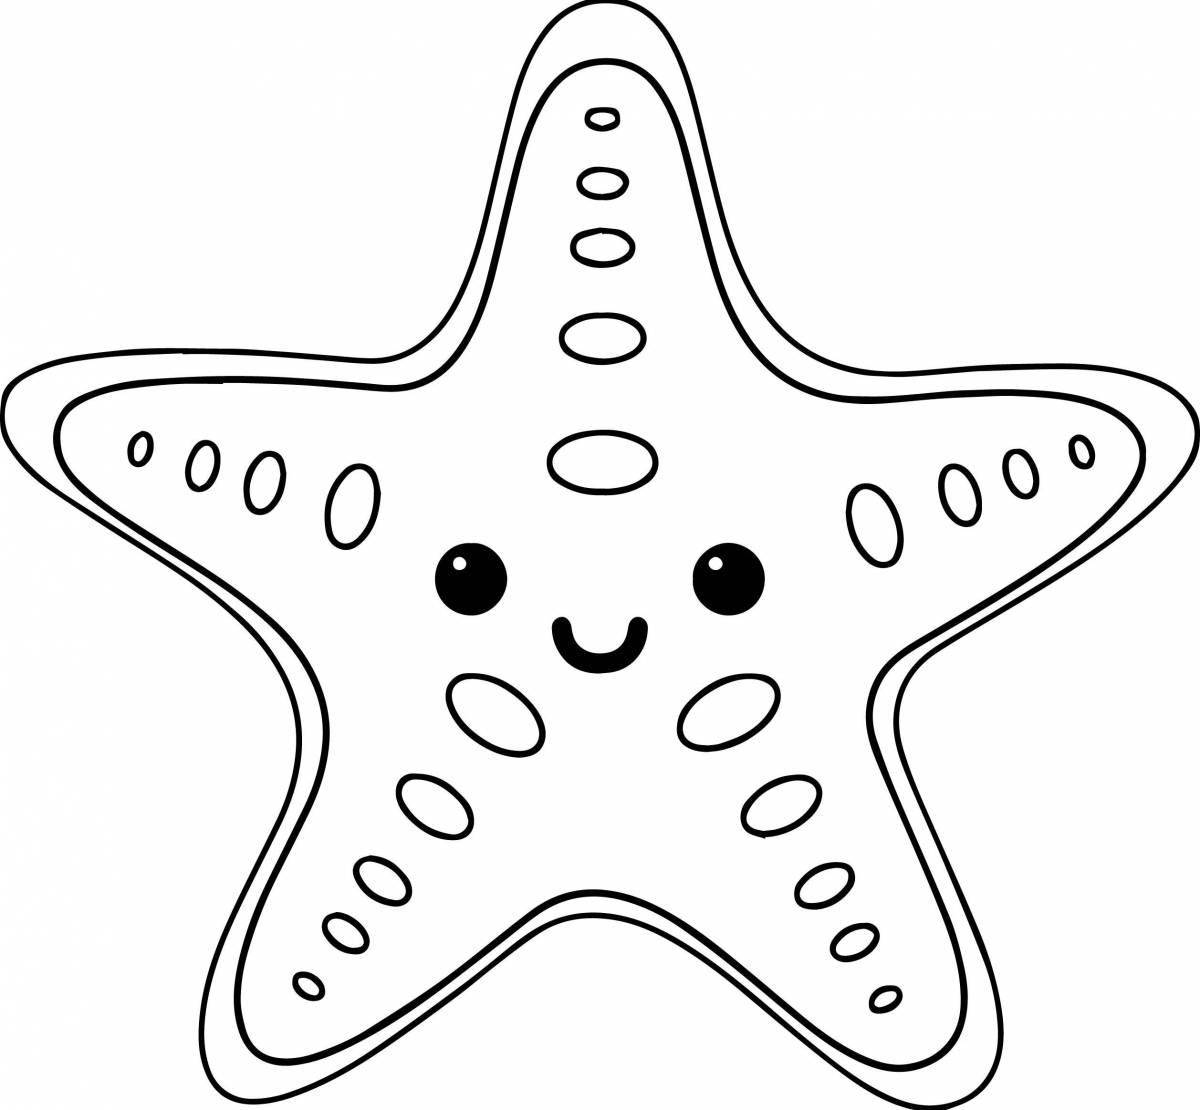 Creative star coloring for kids